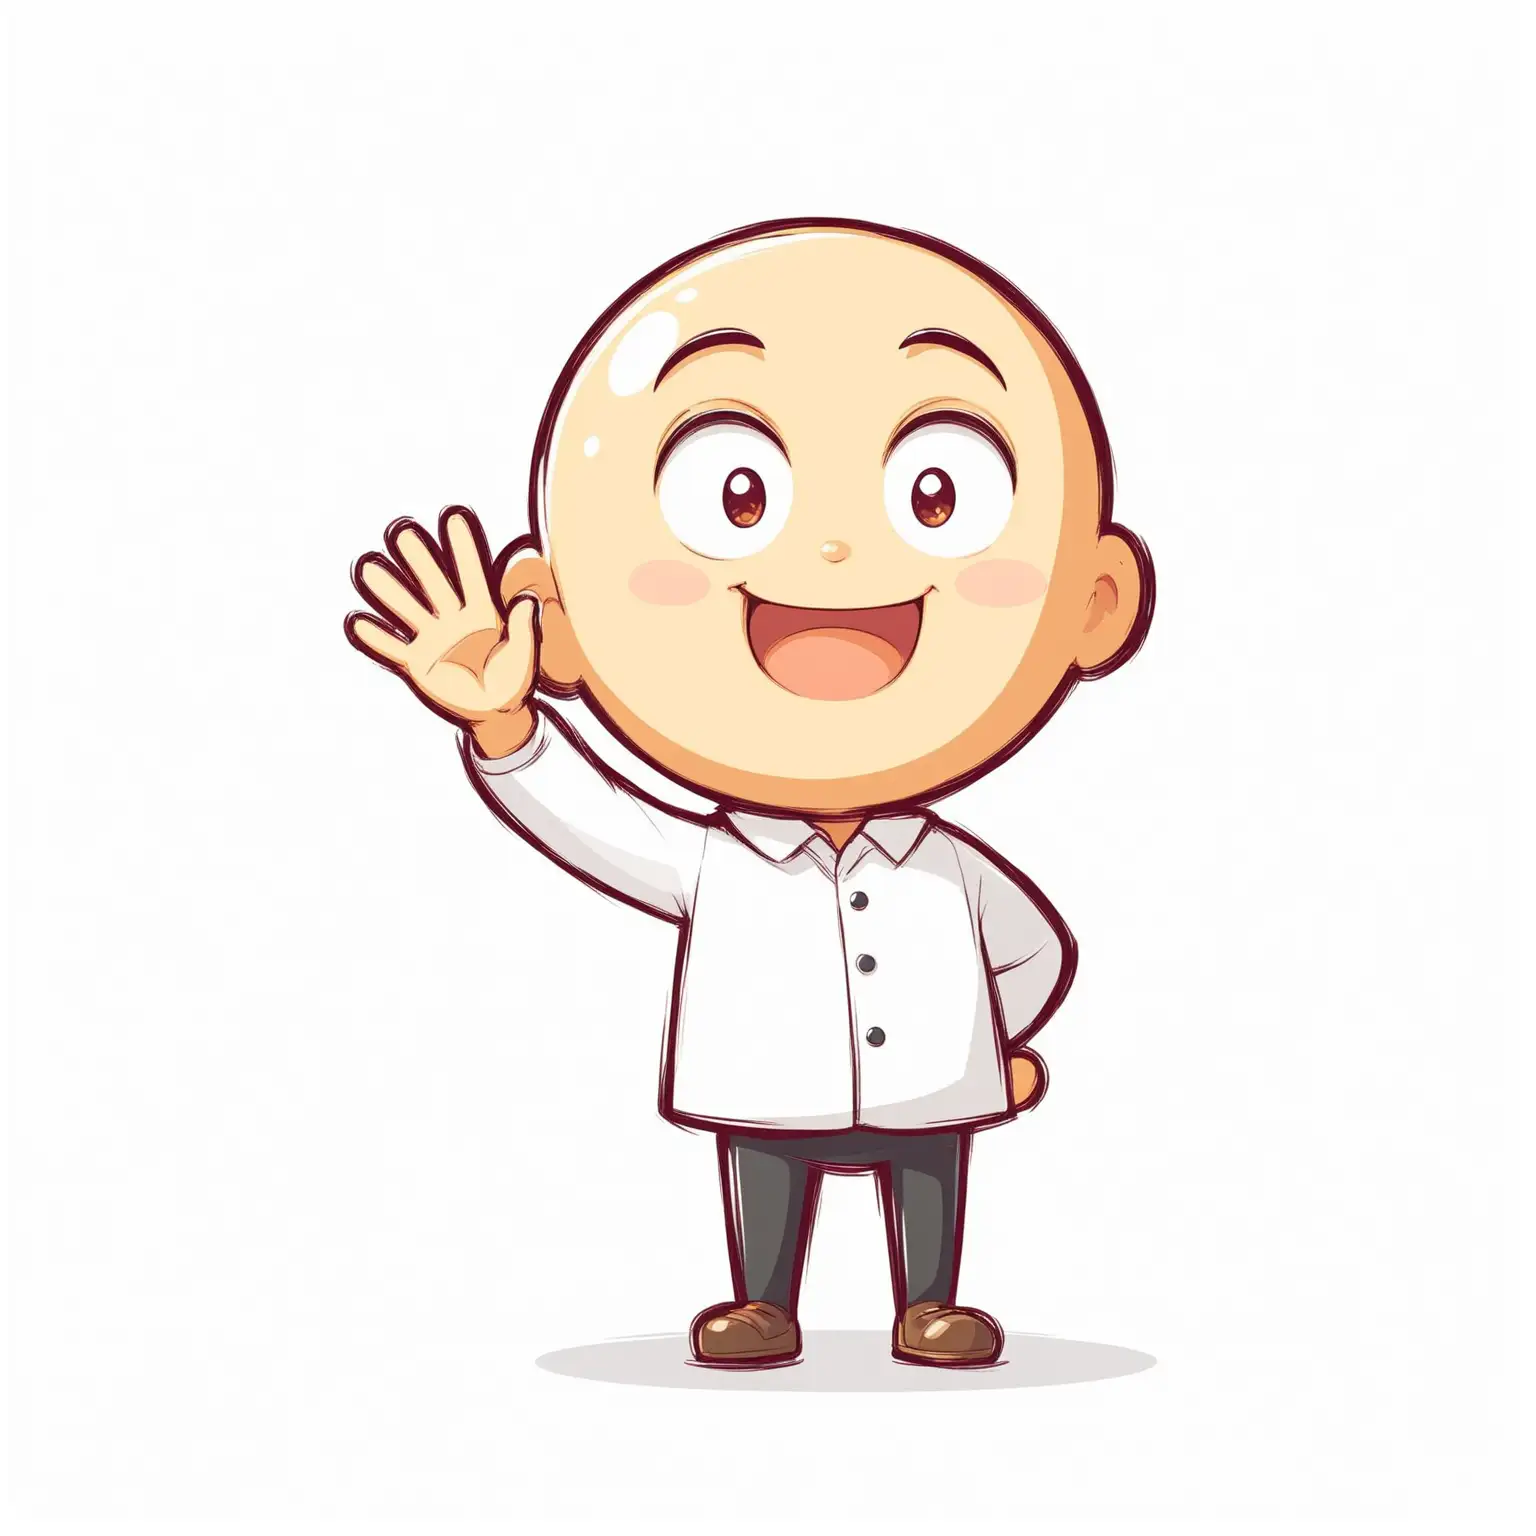 Friendly-Cartoon-Character-Waving-on-White-Background